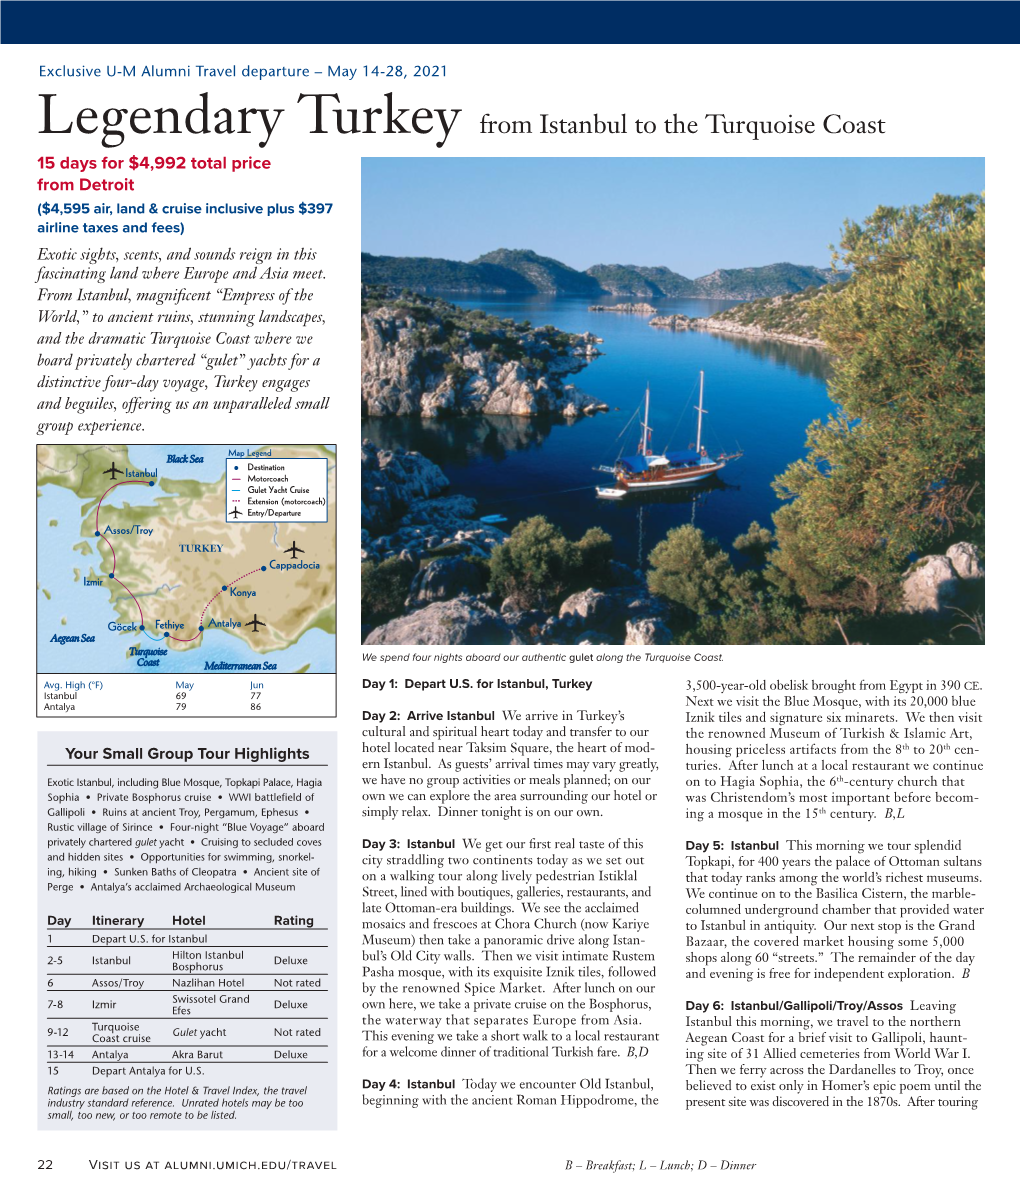 Legendary Turkey from Istanbul to the Turquoise Coast